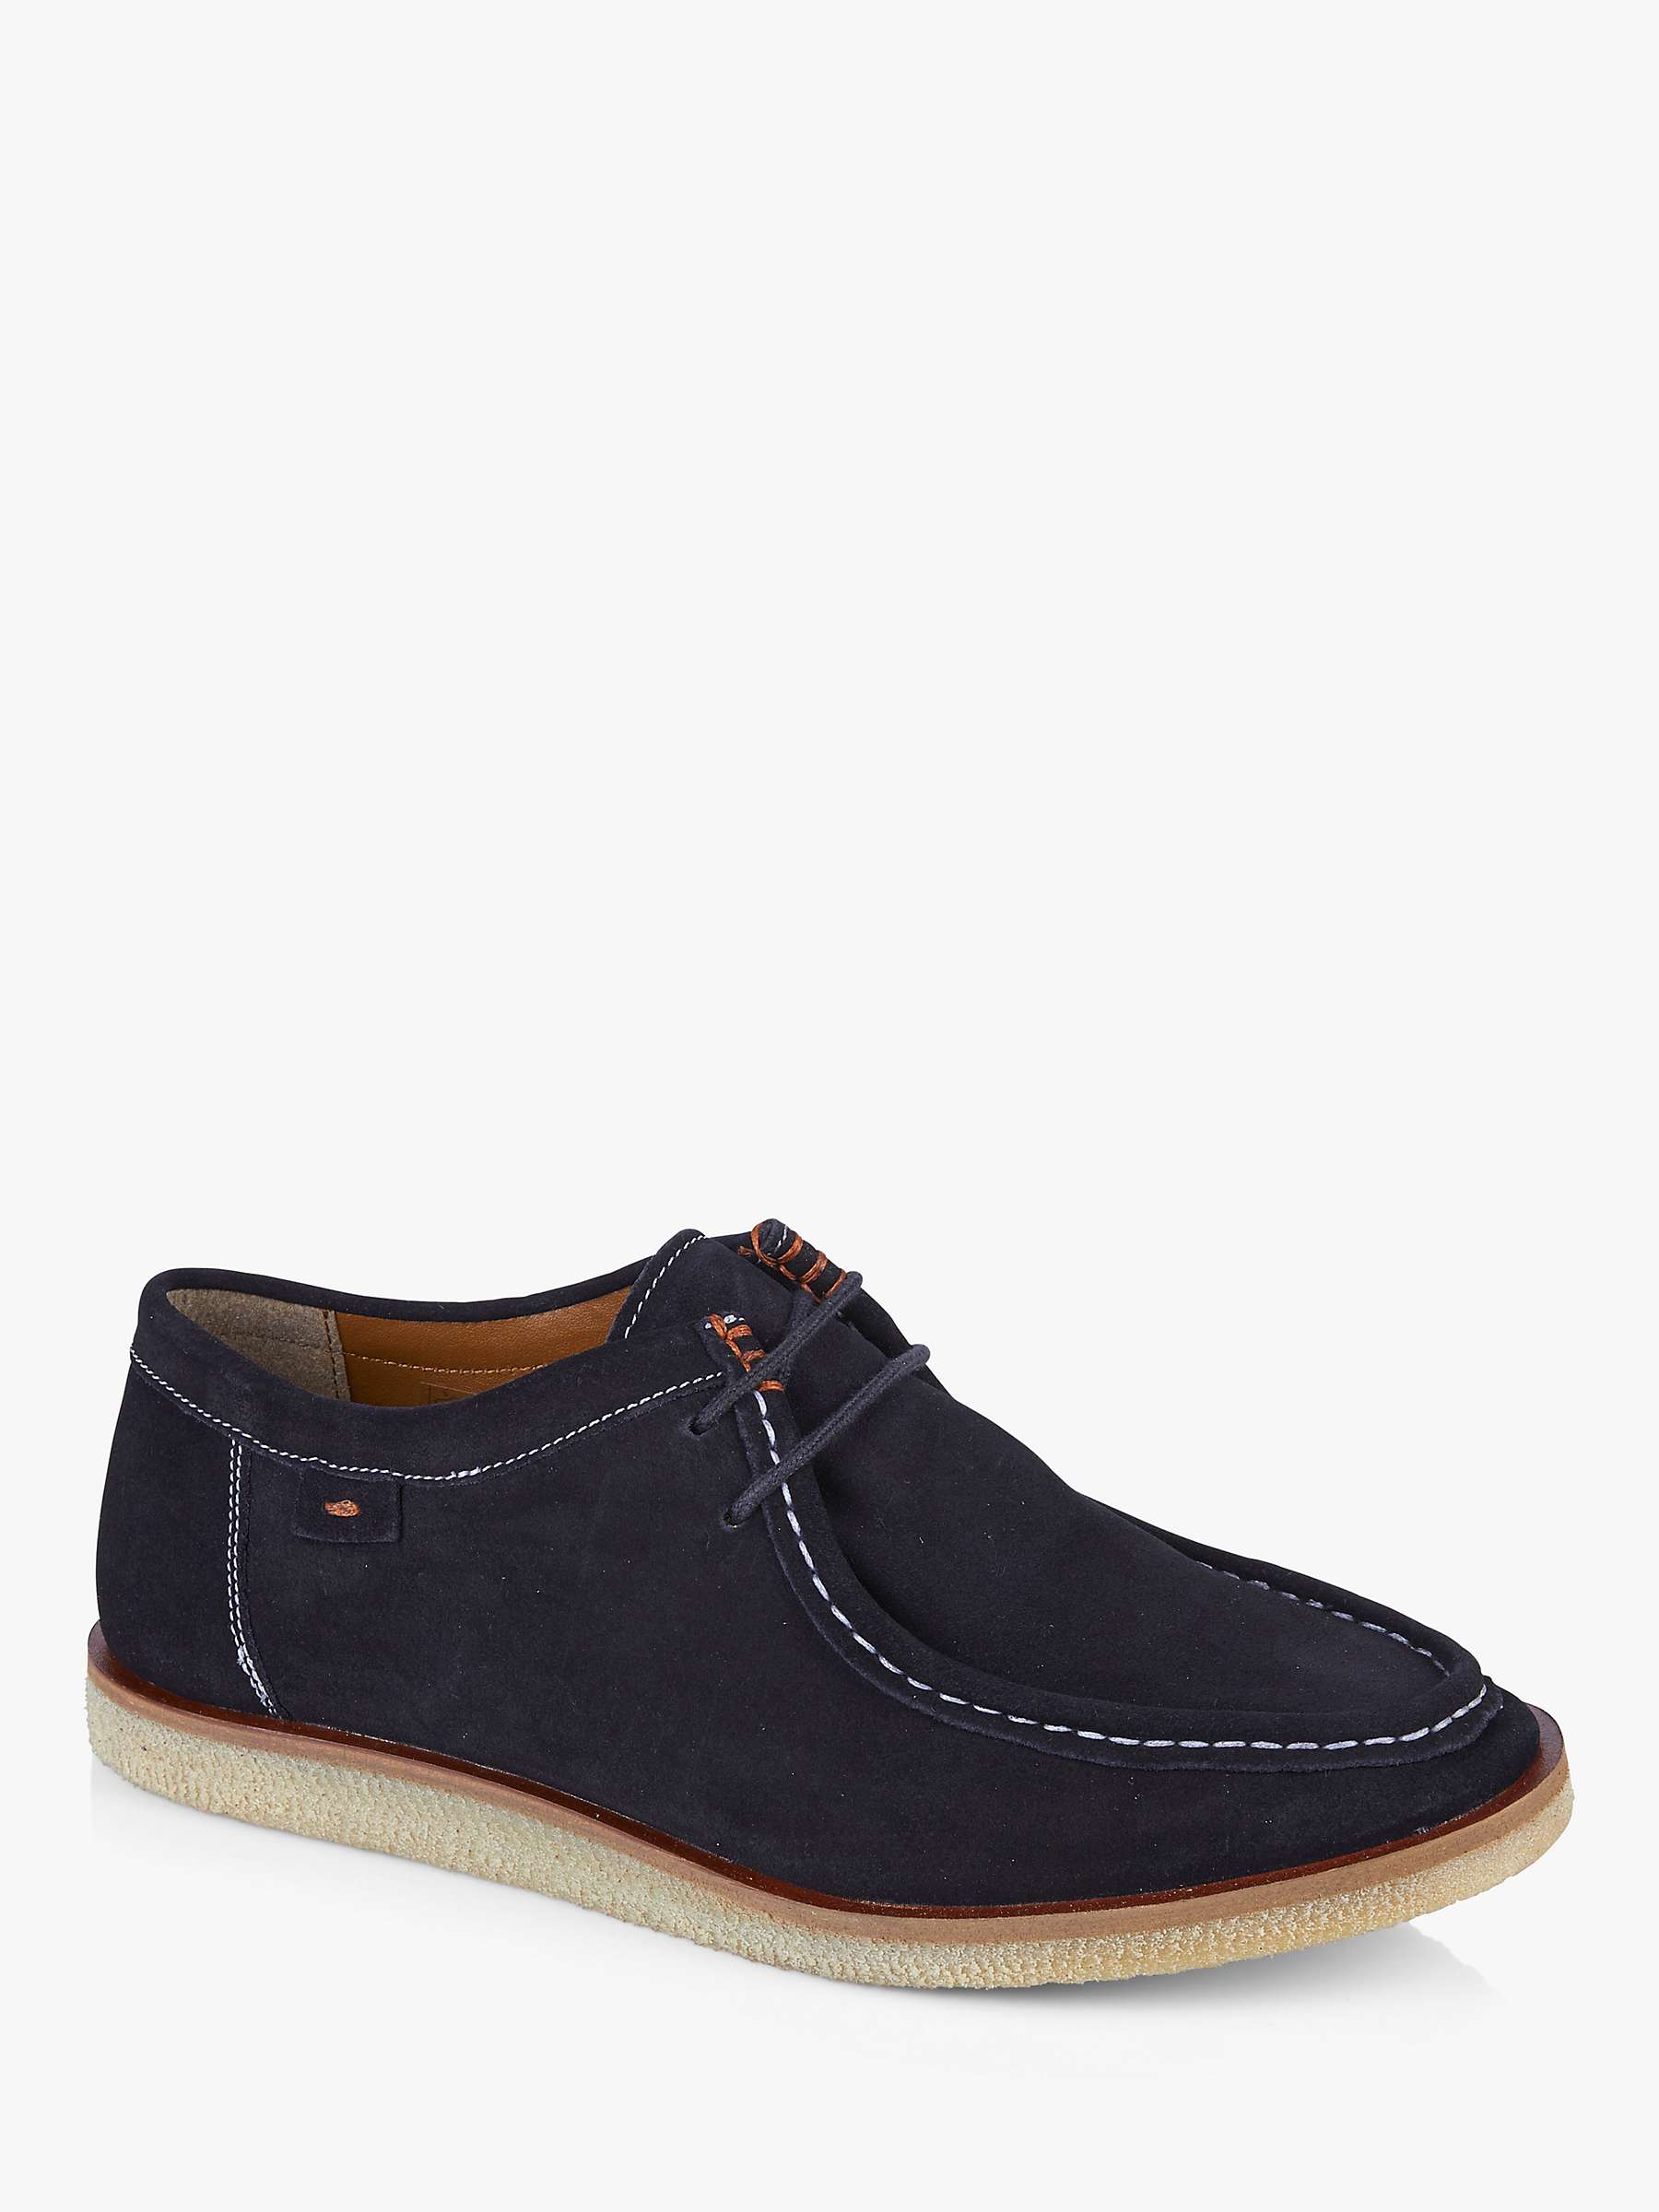 Silver Street London Sydney Suede Moccasin Boots, Navy at John Lewis ...